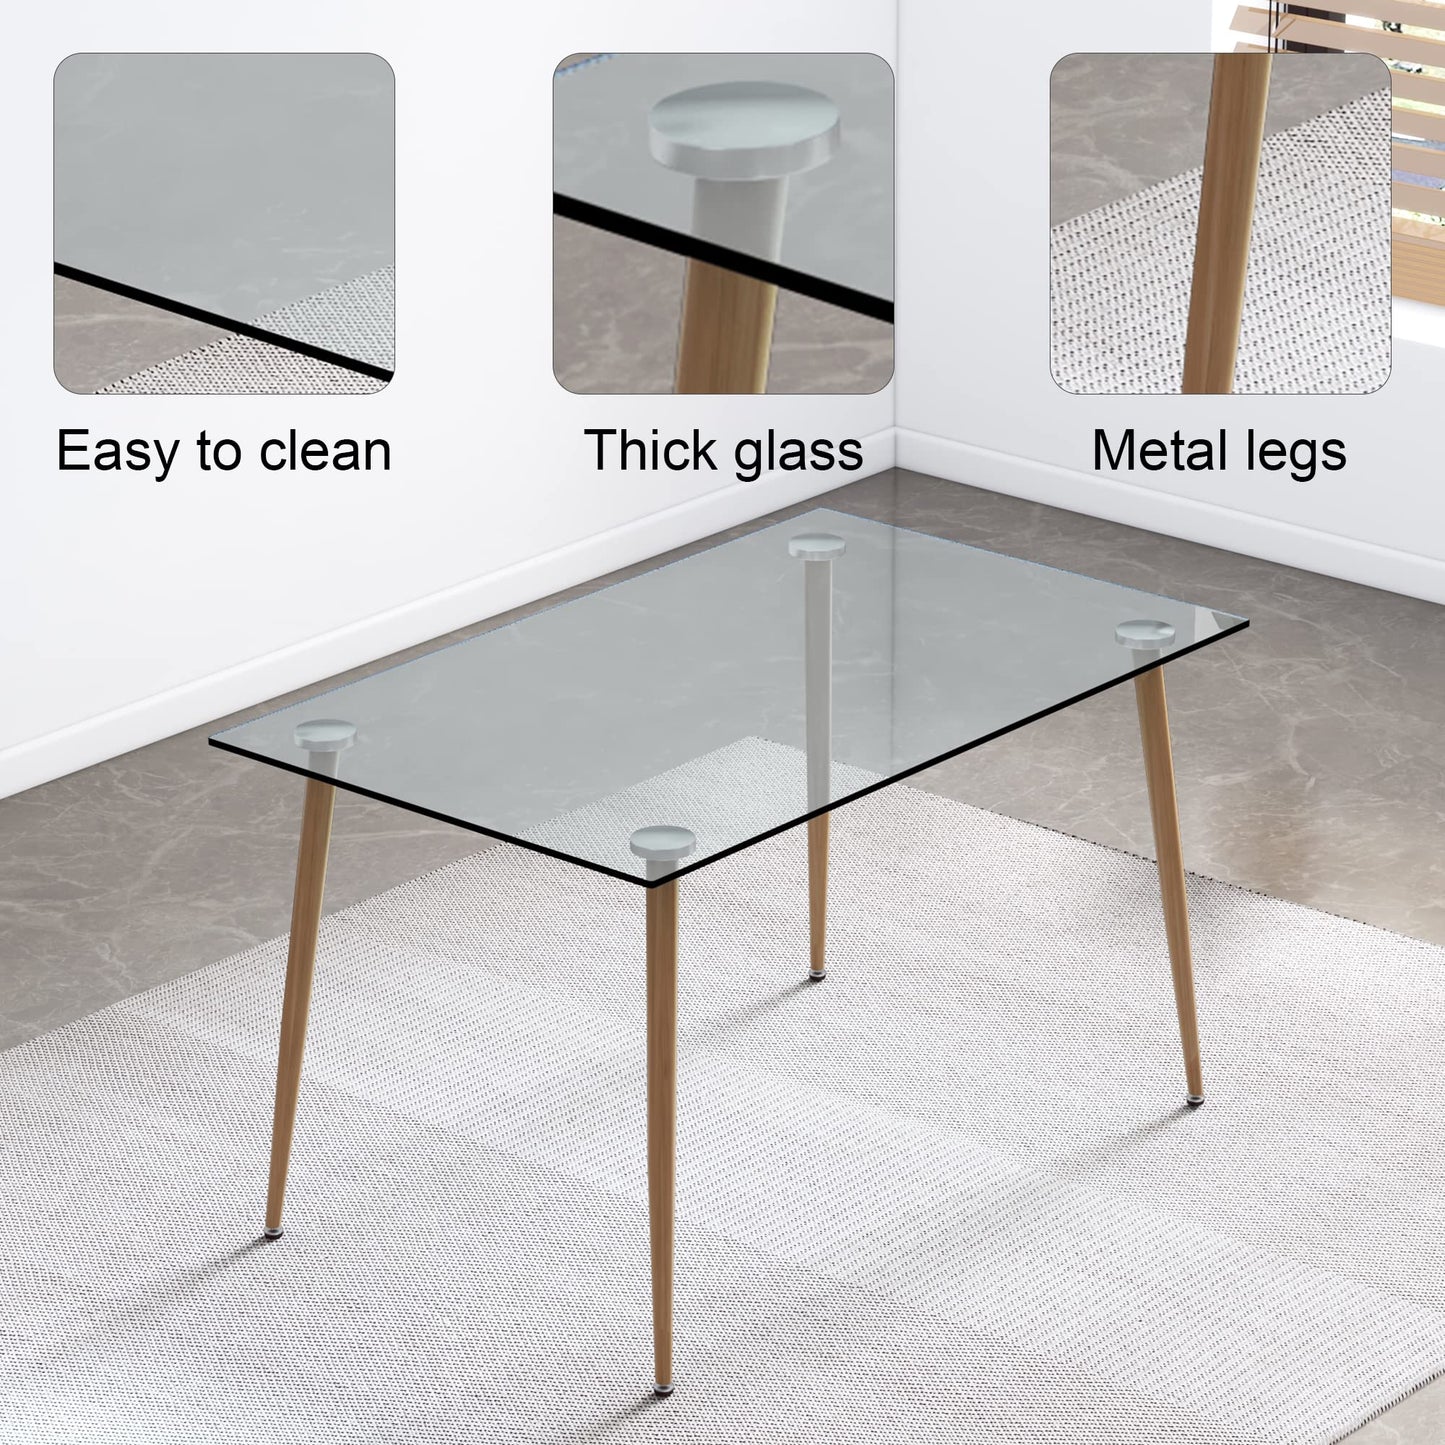 NicBex Modern Rectangular Glass Dining Table for 4-6 with 0.31" Tempered Glass Tabletop and Wood Colored Metal Legs, Writing Table Desk,for Kitchen Dining Living Room, Wood